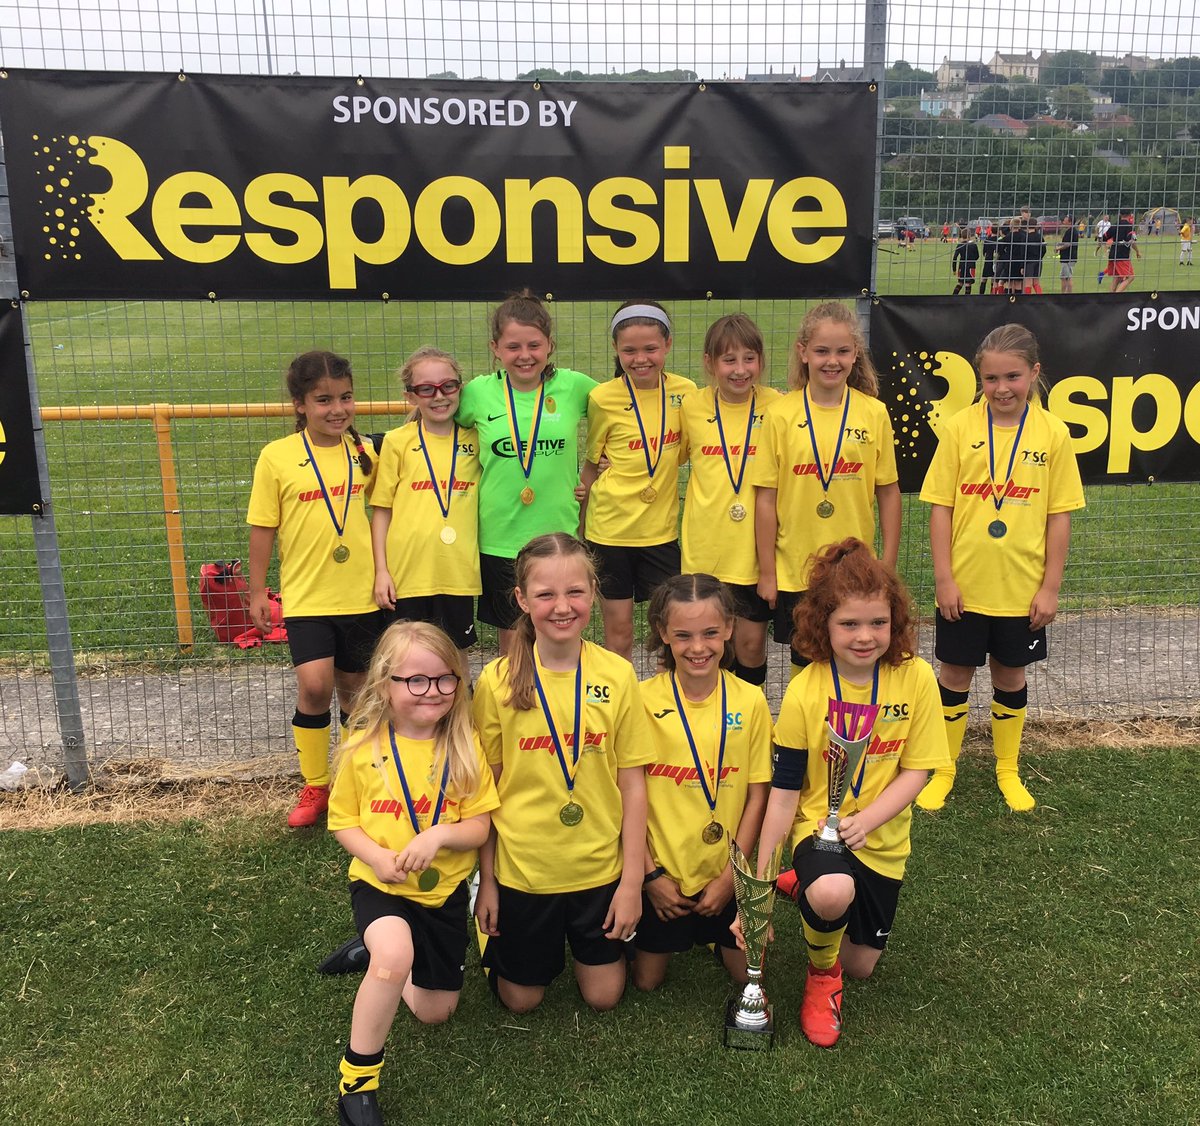 @whitehavenafc @JfdcMyerscough @NikePartner Under 9’s Myerscough young ladies winning both the U9 and U10 festival at Whitehaven !! Nice club, nice people, thanks for organising #wafcfestival2019 see you next year hopefully 👍⚽️🍺